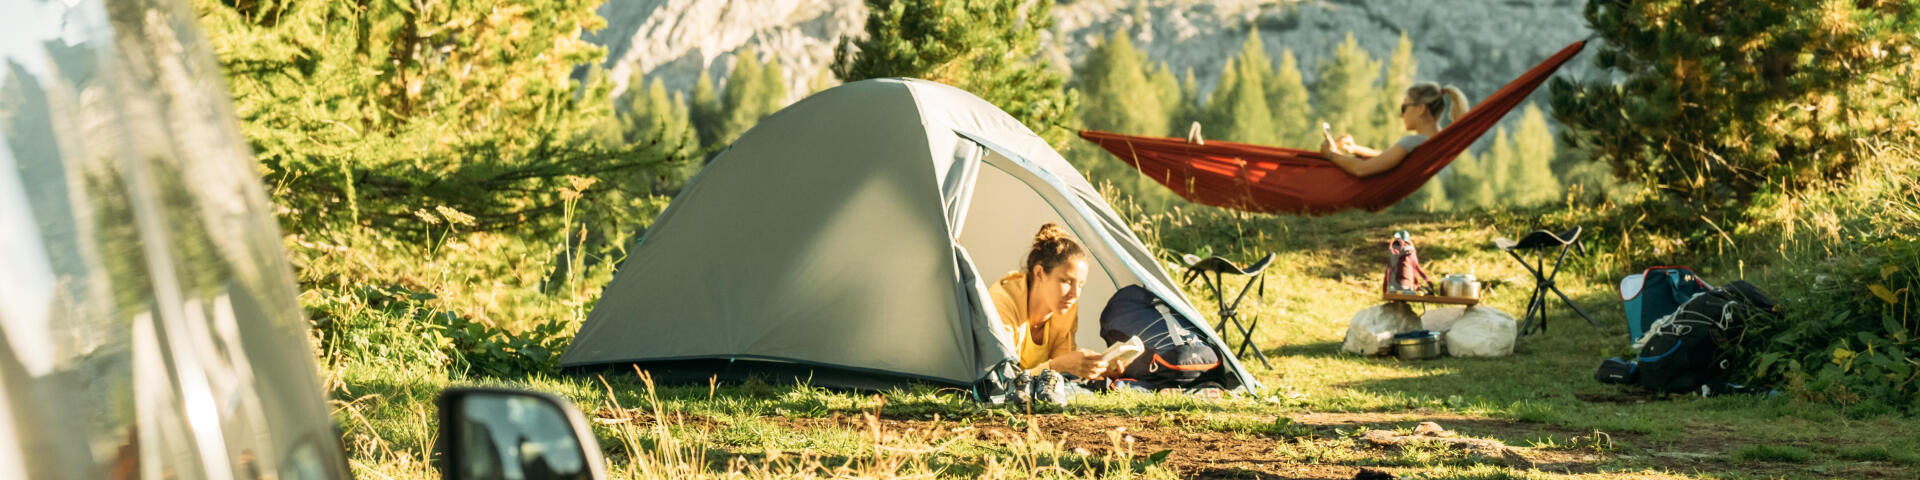 2 women camping and enjoying the quiet of nature